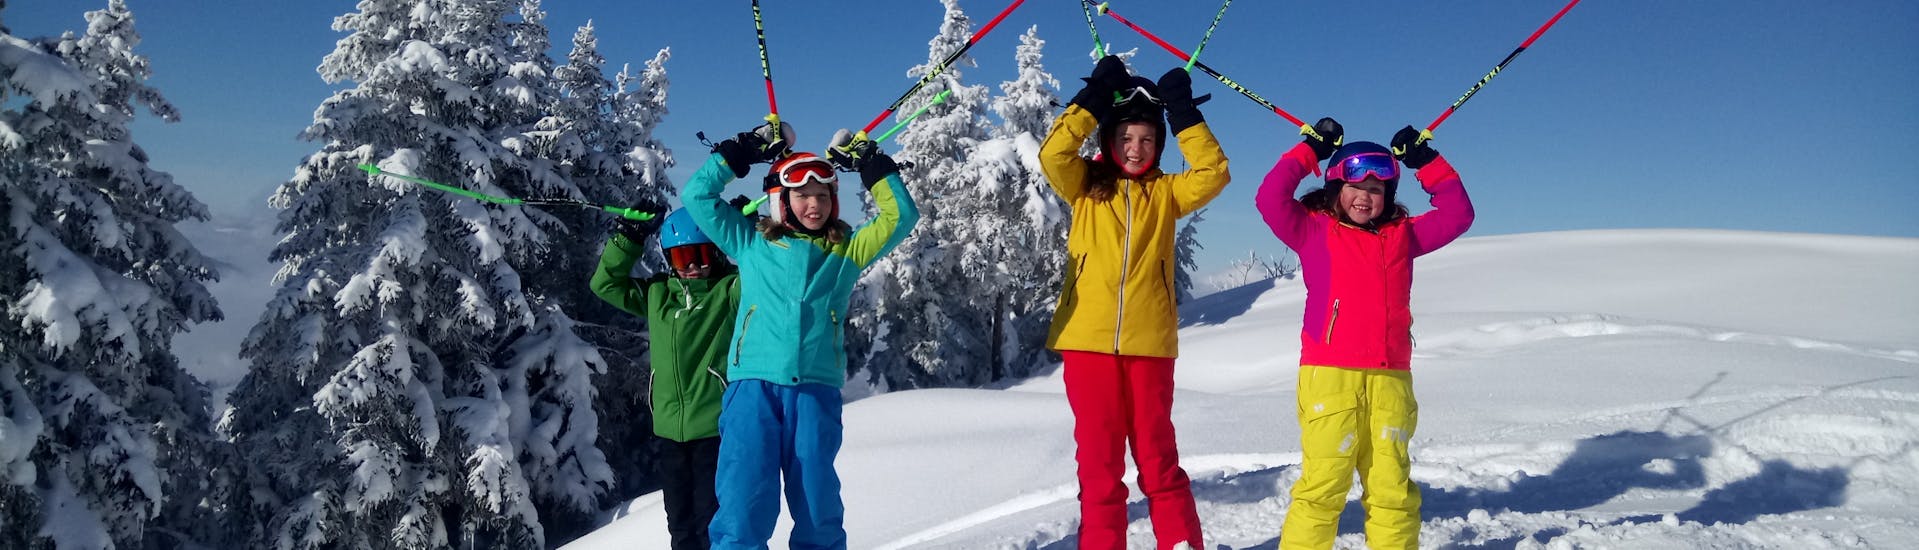 Children in the snow during their private ski lessons for kids (from 4 yrs) for all levels with the Skiart ski school in Kitzbühel.